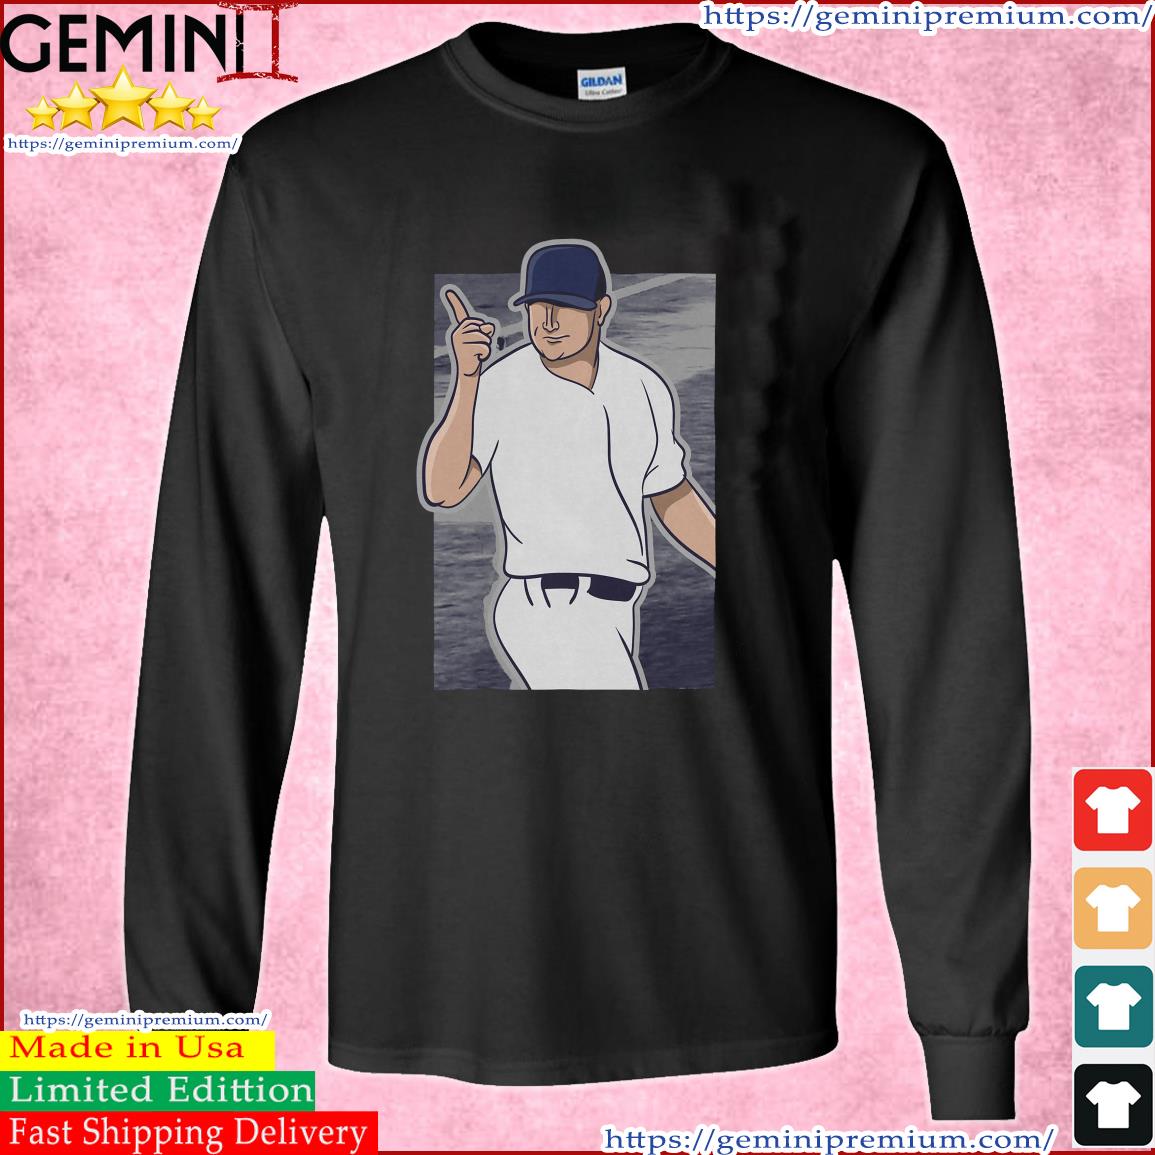 Gerrit Cole The Ace Comic shirt, hoodie, sweater, long sleeve and tank top